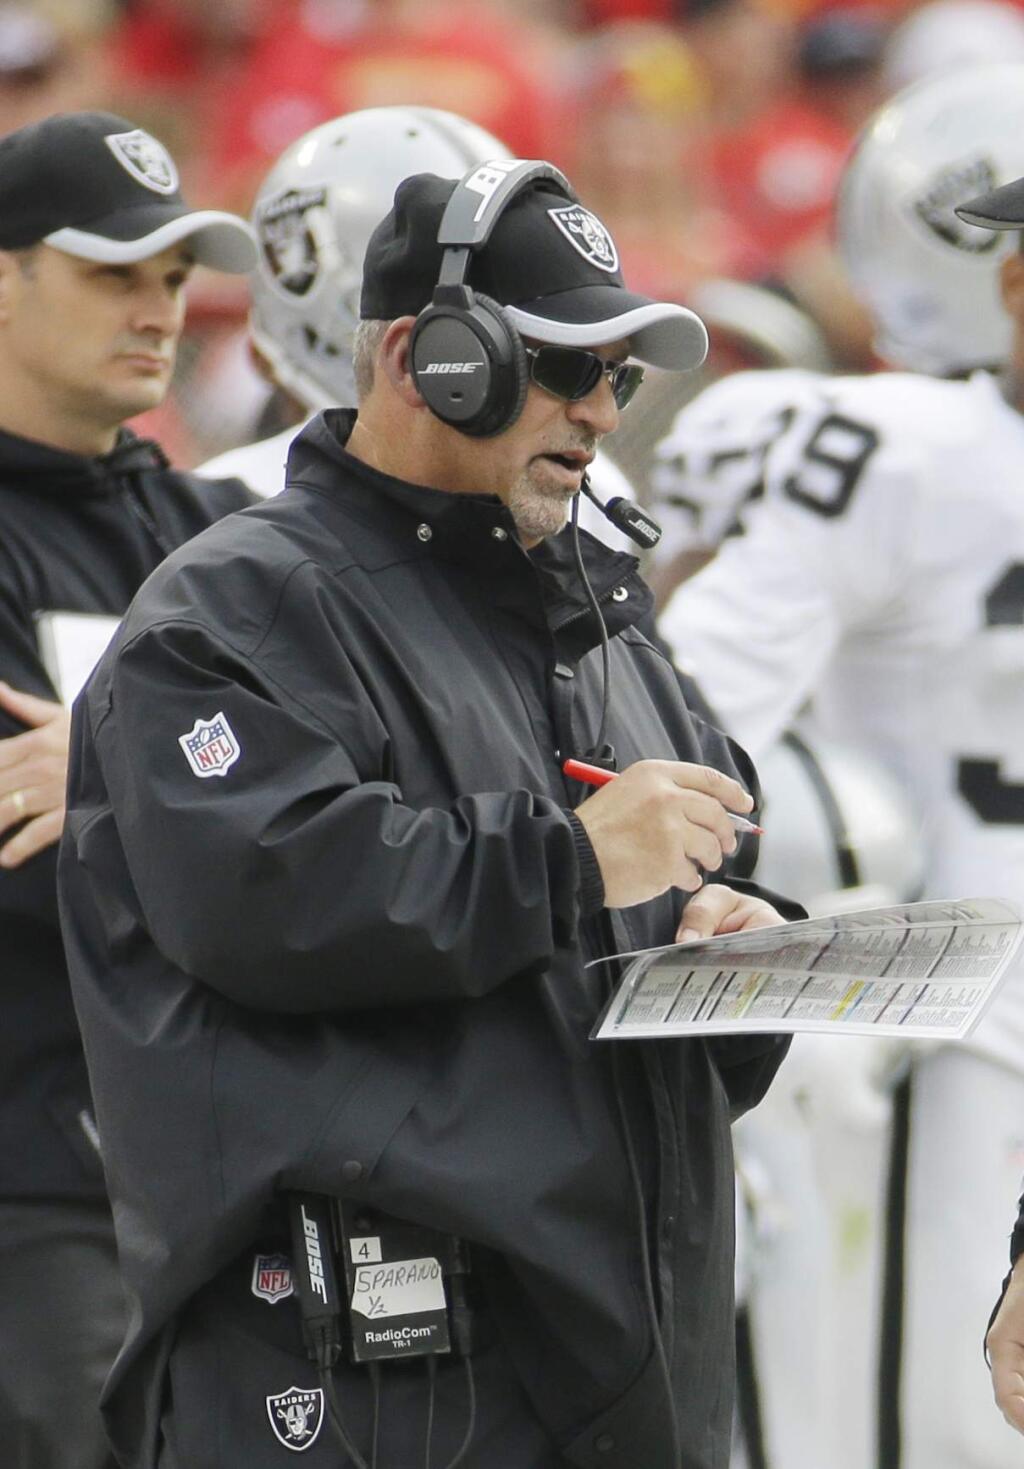 Oakland Raiders interim head coach Tony Sparano looks at notes during the first half of an NFL football game against the Kansas City Chiefs in Kansas City, Mo., Sunday, Dec. 14, 2014. (AP Photo/Charlie Riedel)